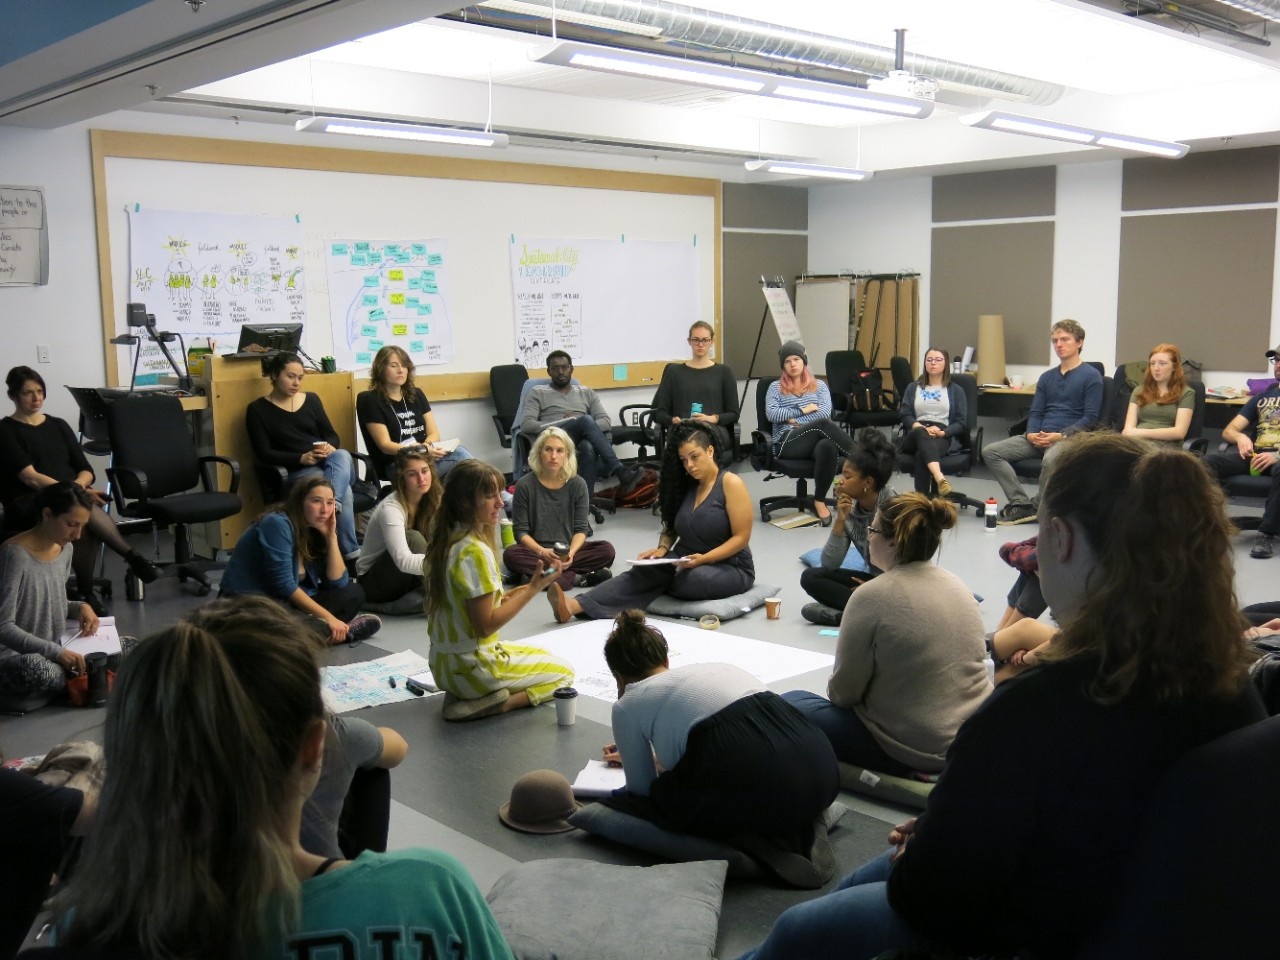 A group of people sit together in a large circle, with one person writing or drawing on a sheet of paper on the floor.